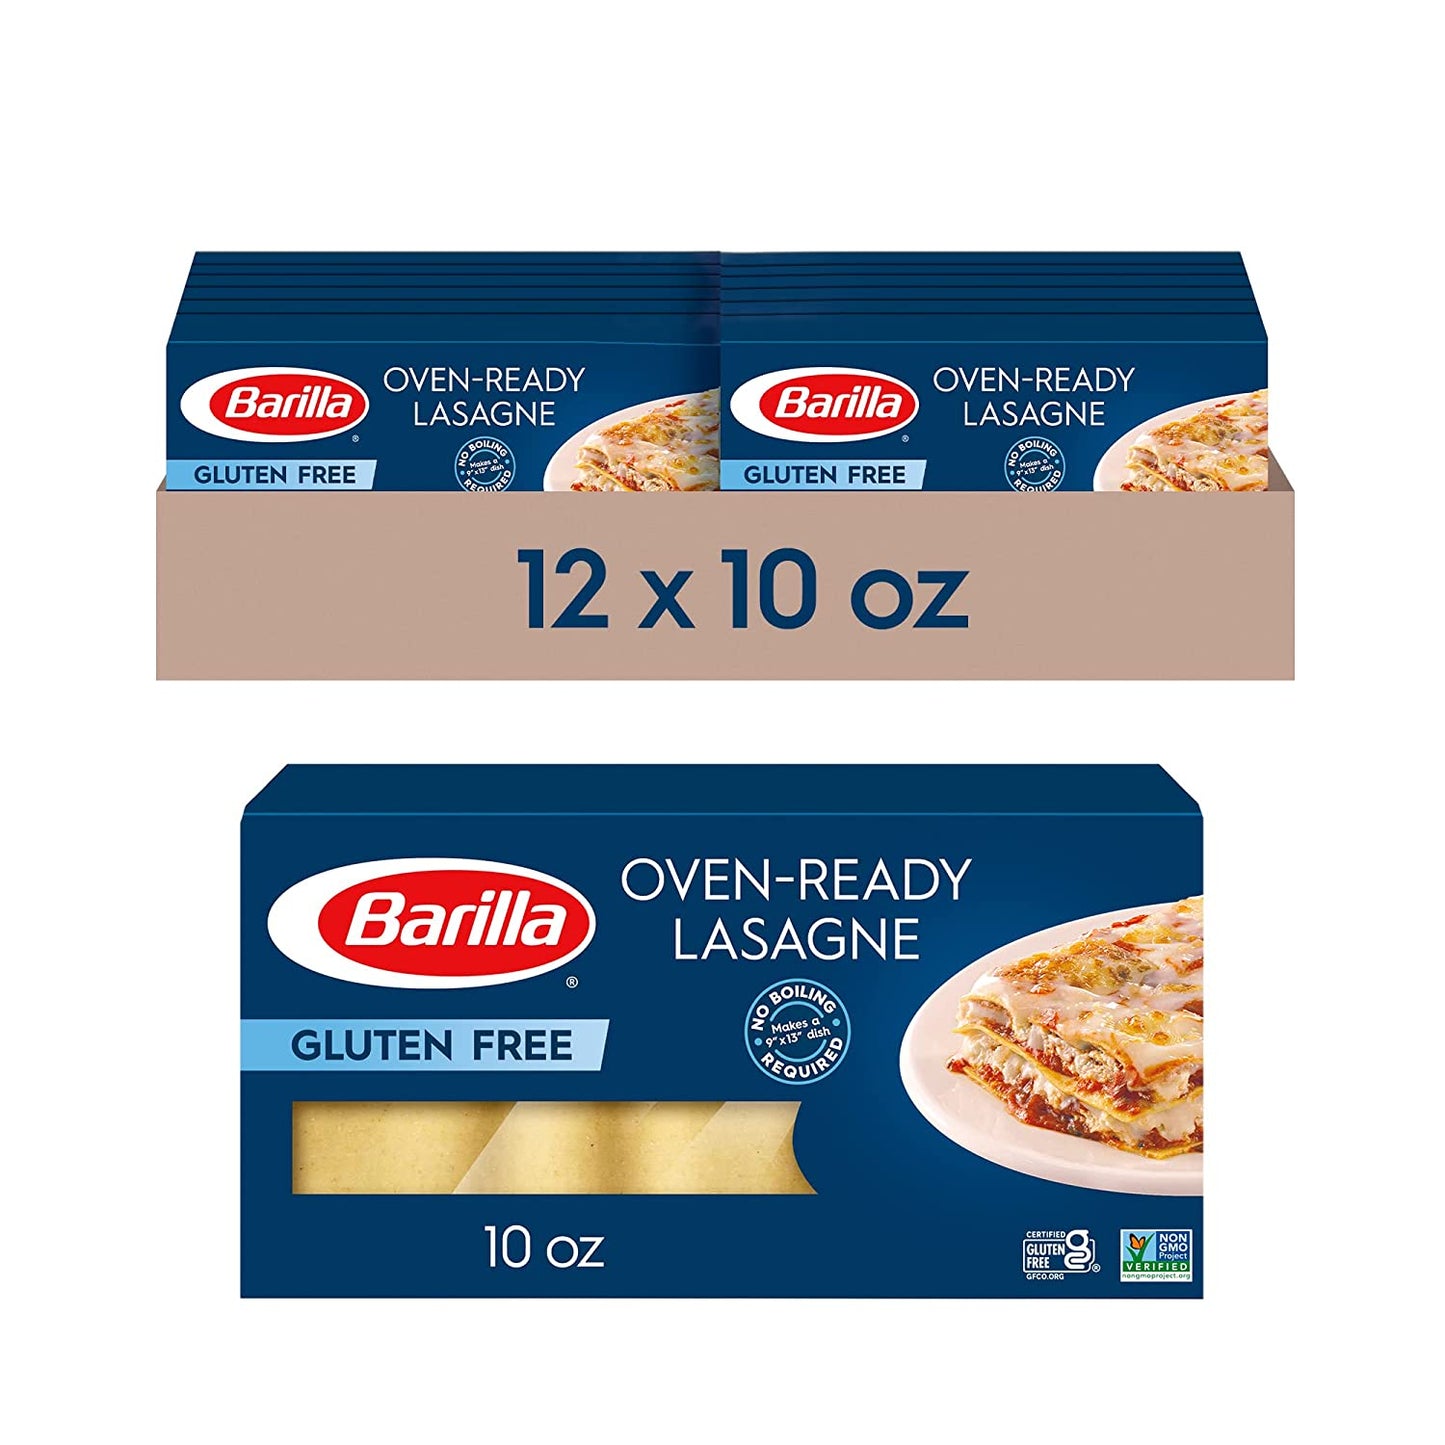 BARILLA Gluten Free Oven-Ready Lasagne, 10 Ounce (Pack of 12) - Non-GMO Gluten Free Pasta Made with Blend of Corn & Rice - Vegan Pasta